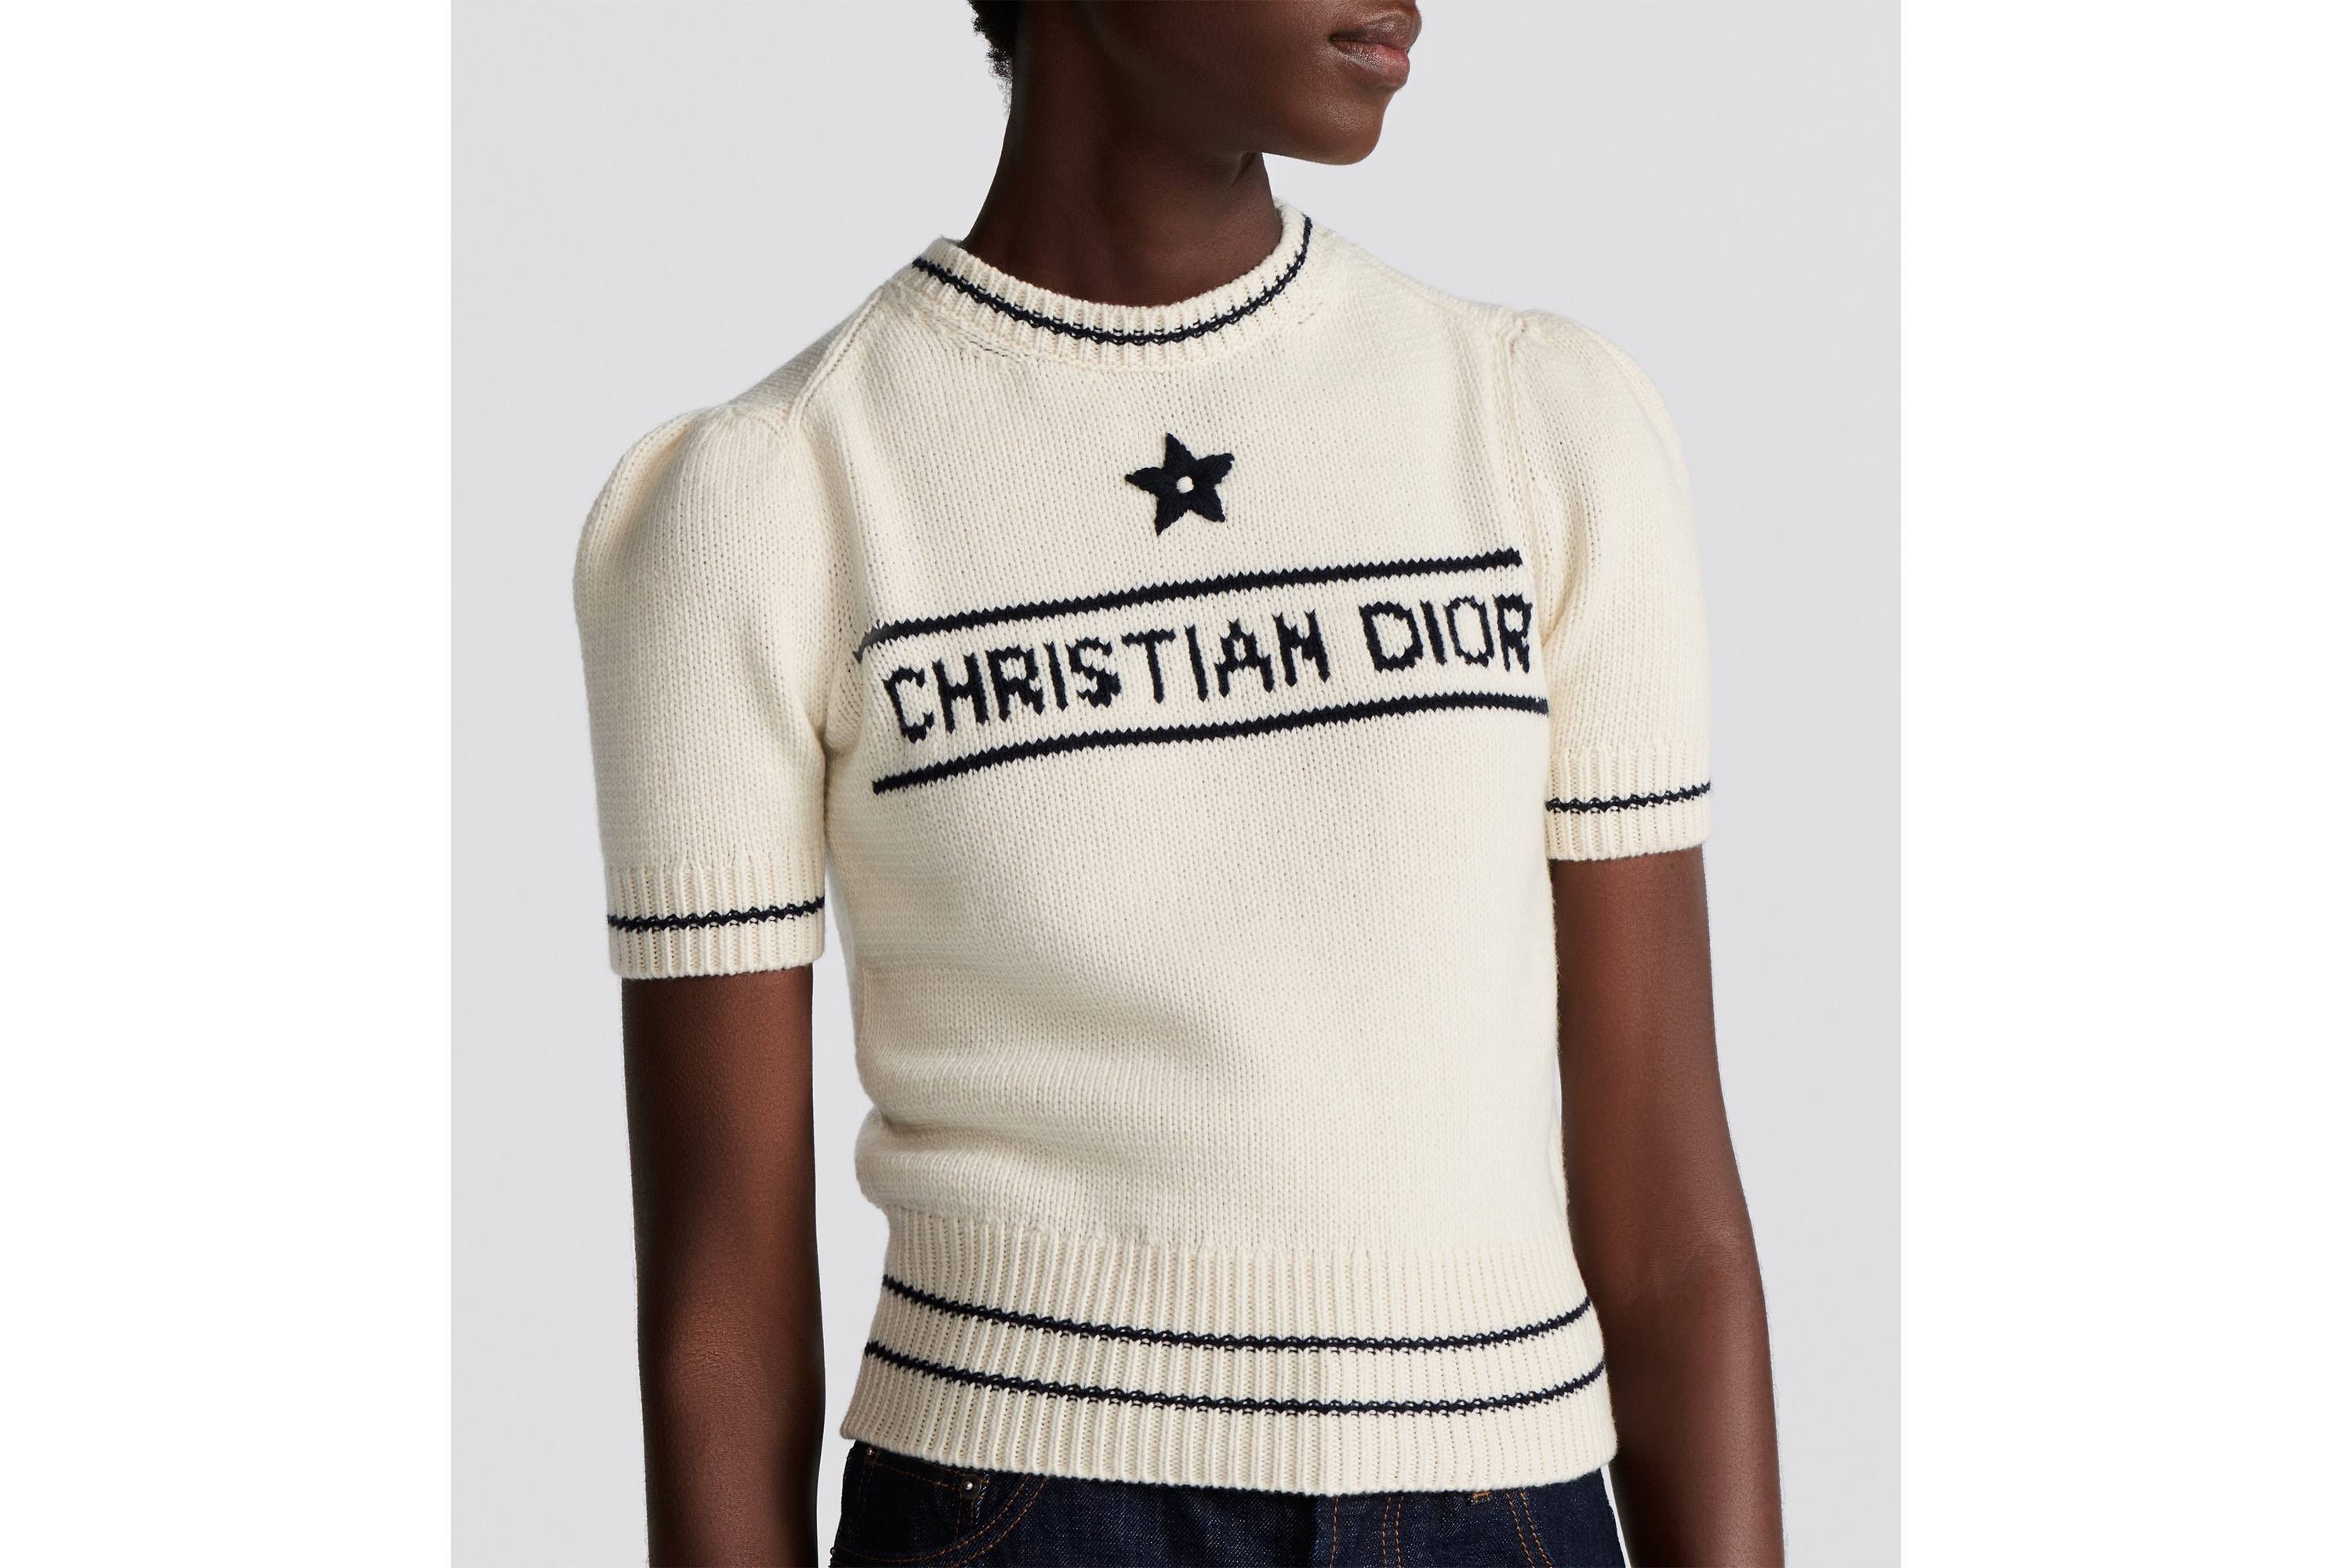 'CHRISTIAN DIOR' Short-Sleeved Sweater - 7